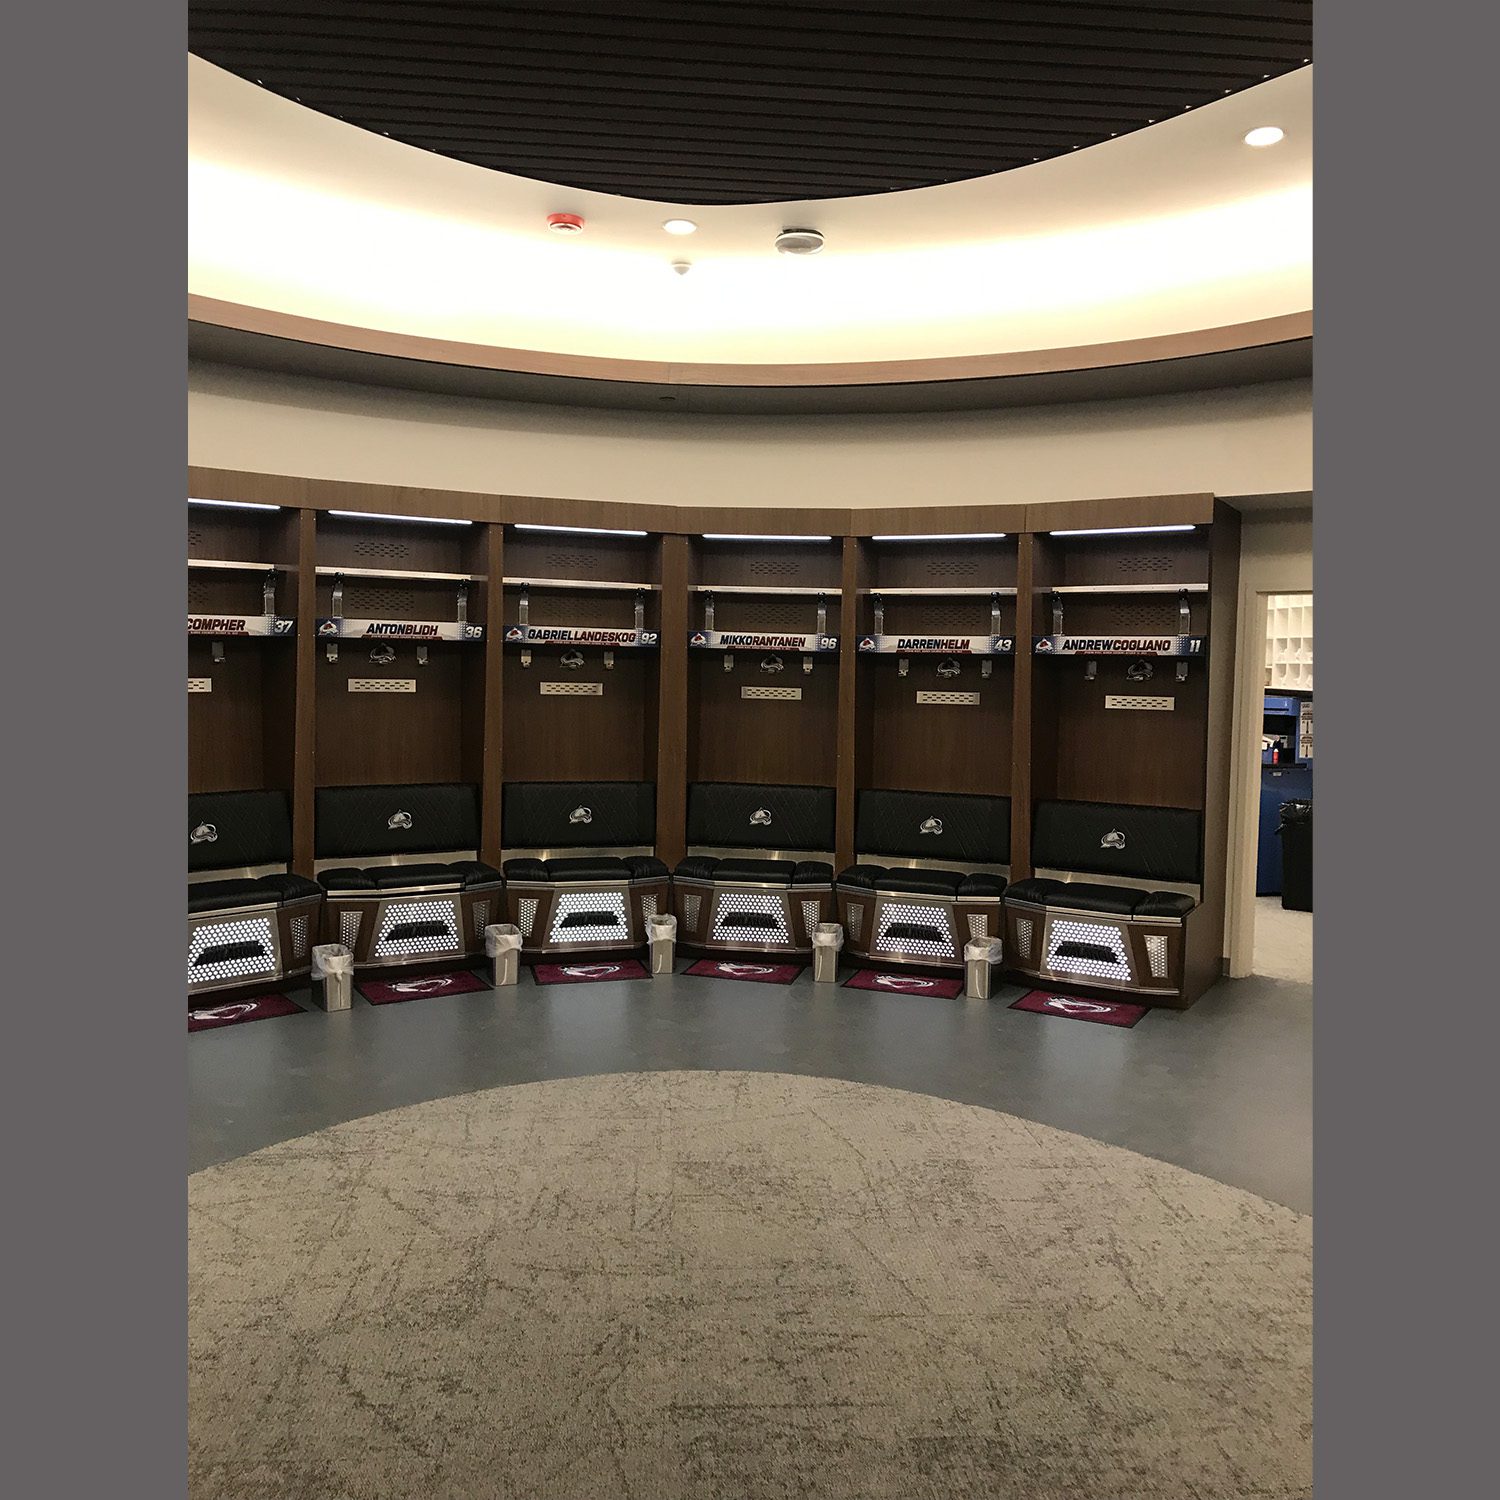 Inside the Avs Dressing Room: We're finding different ways to